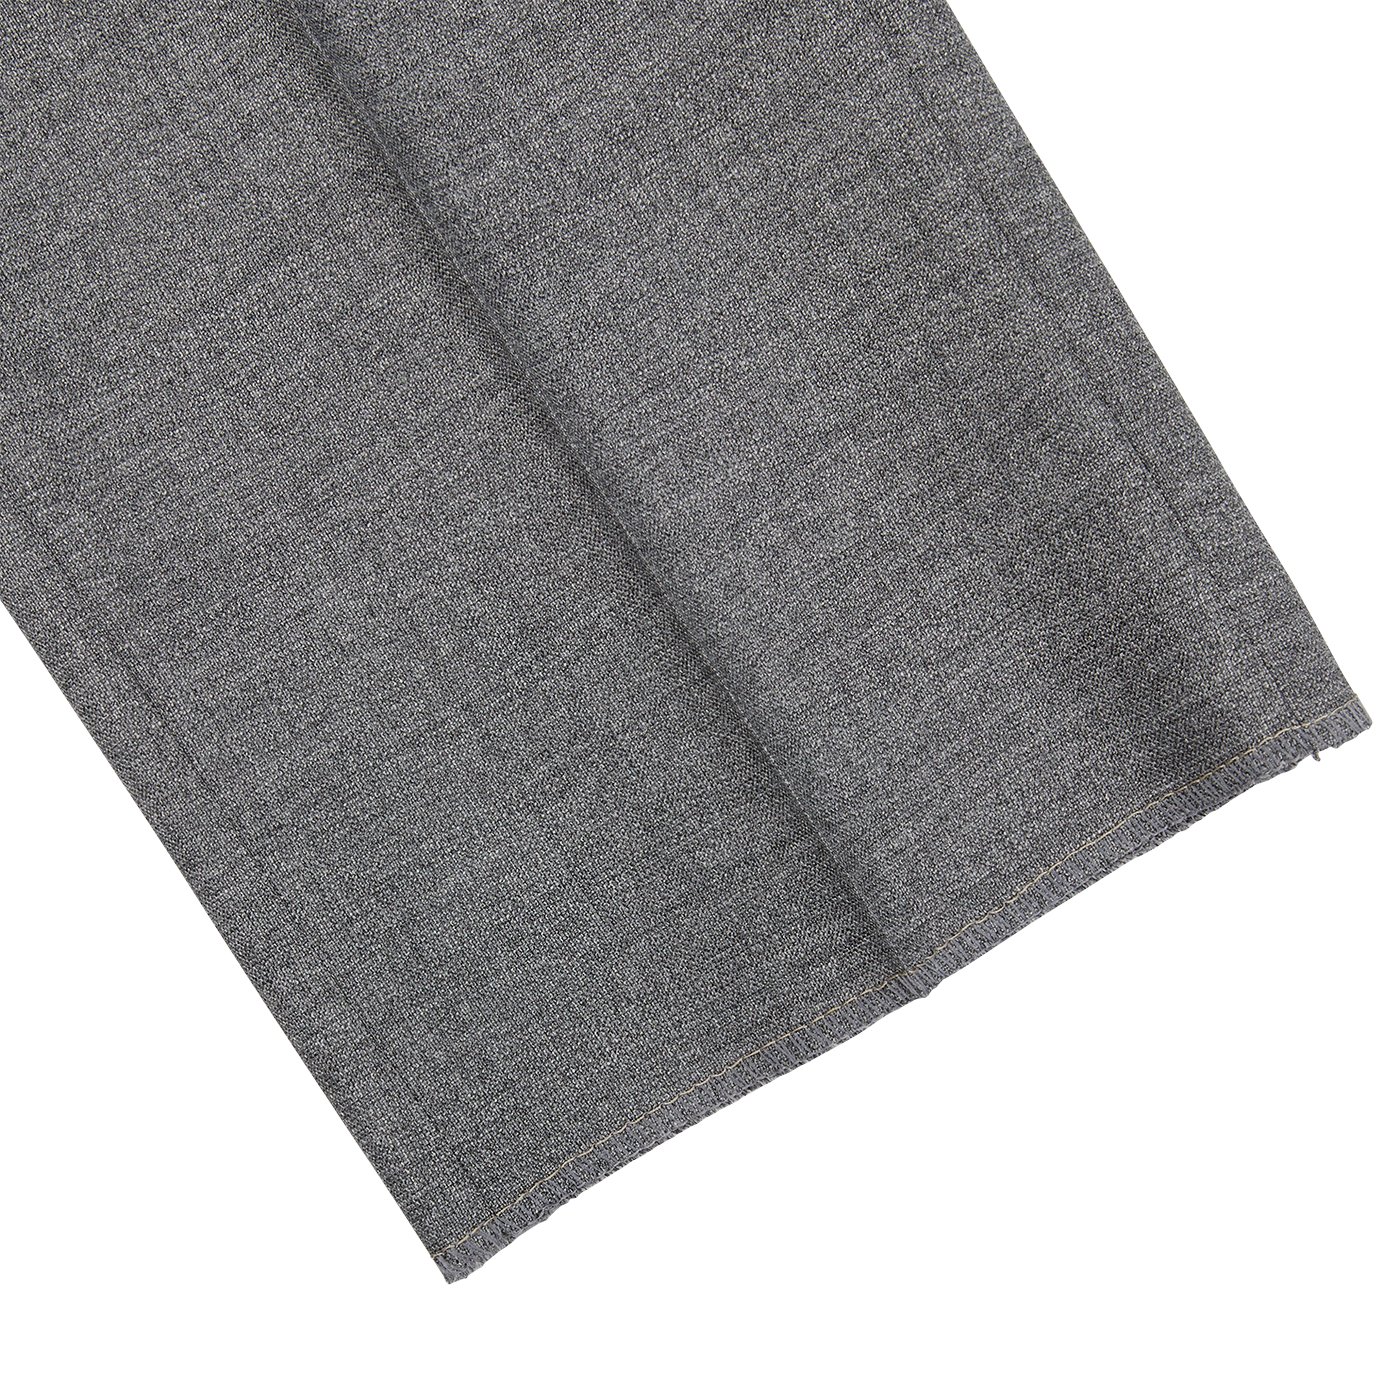 A close up image of a pair of Berwich Medium Grey Wool Fresco Flat Front Trousers.